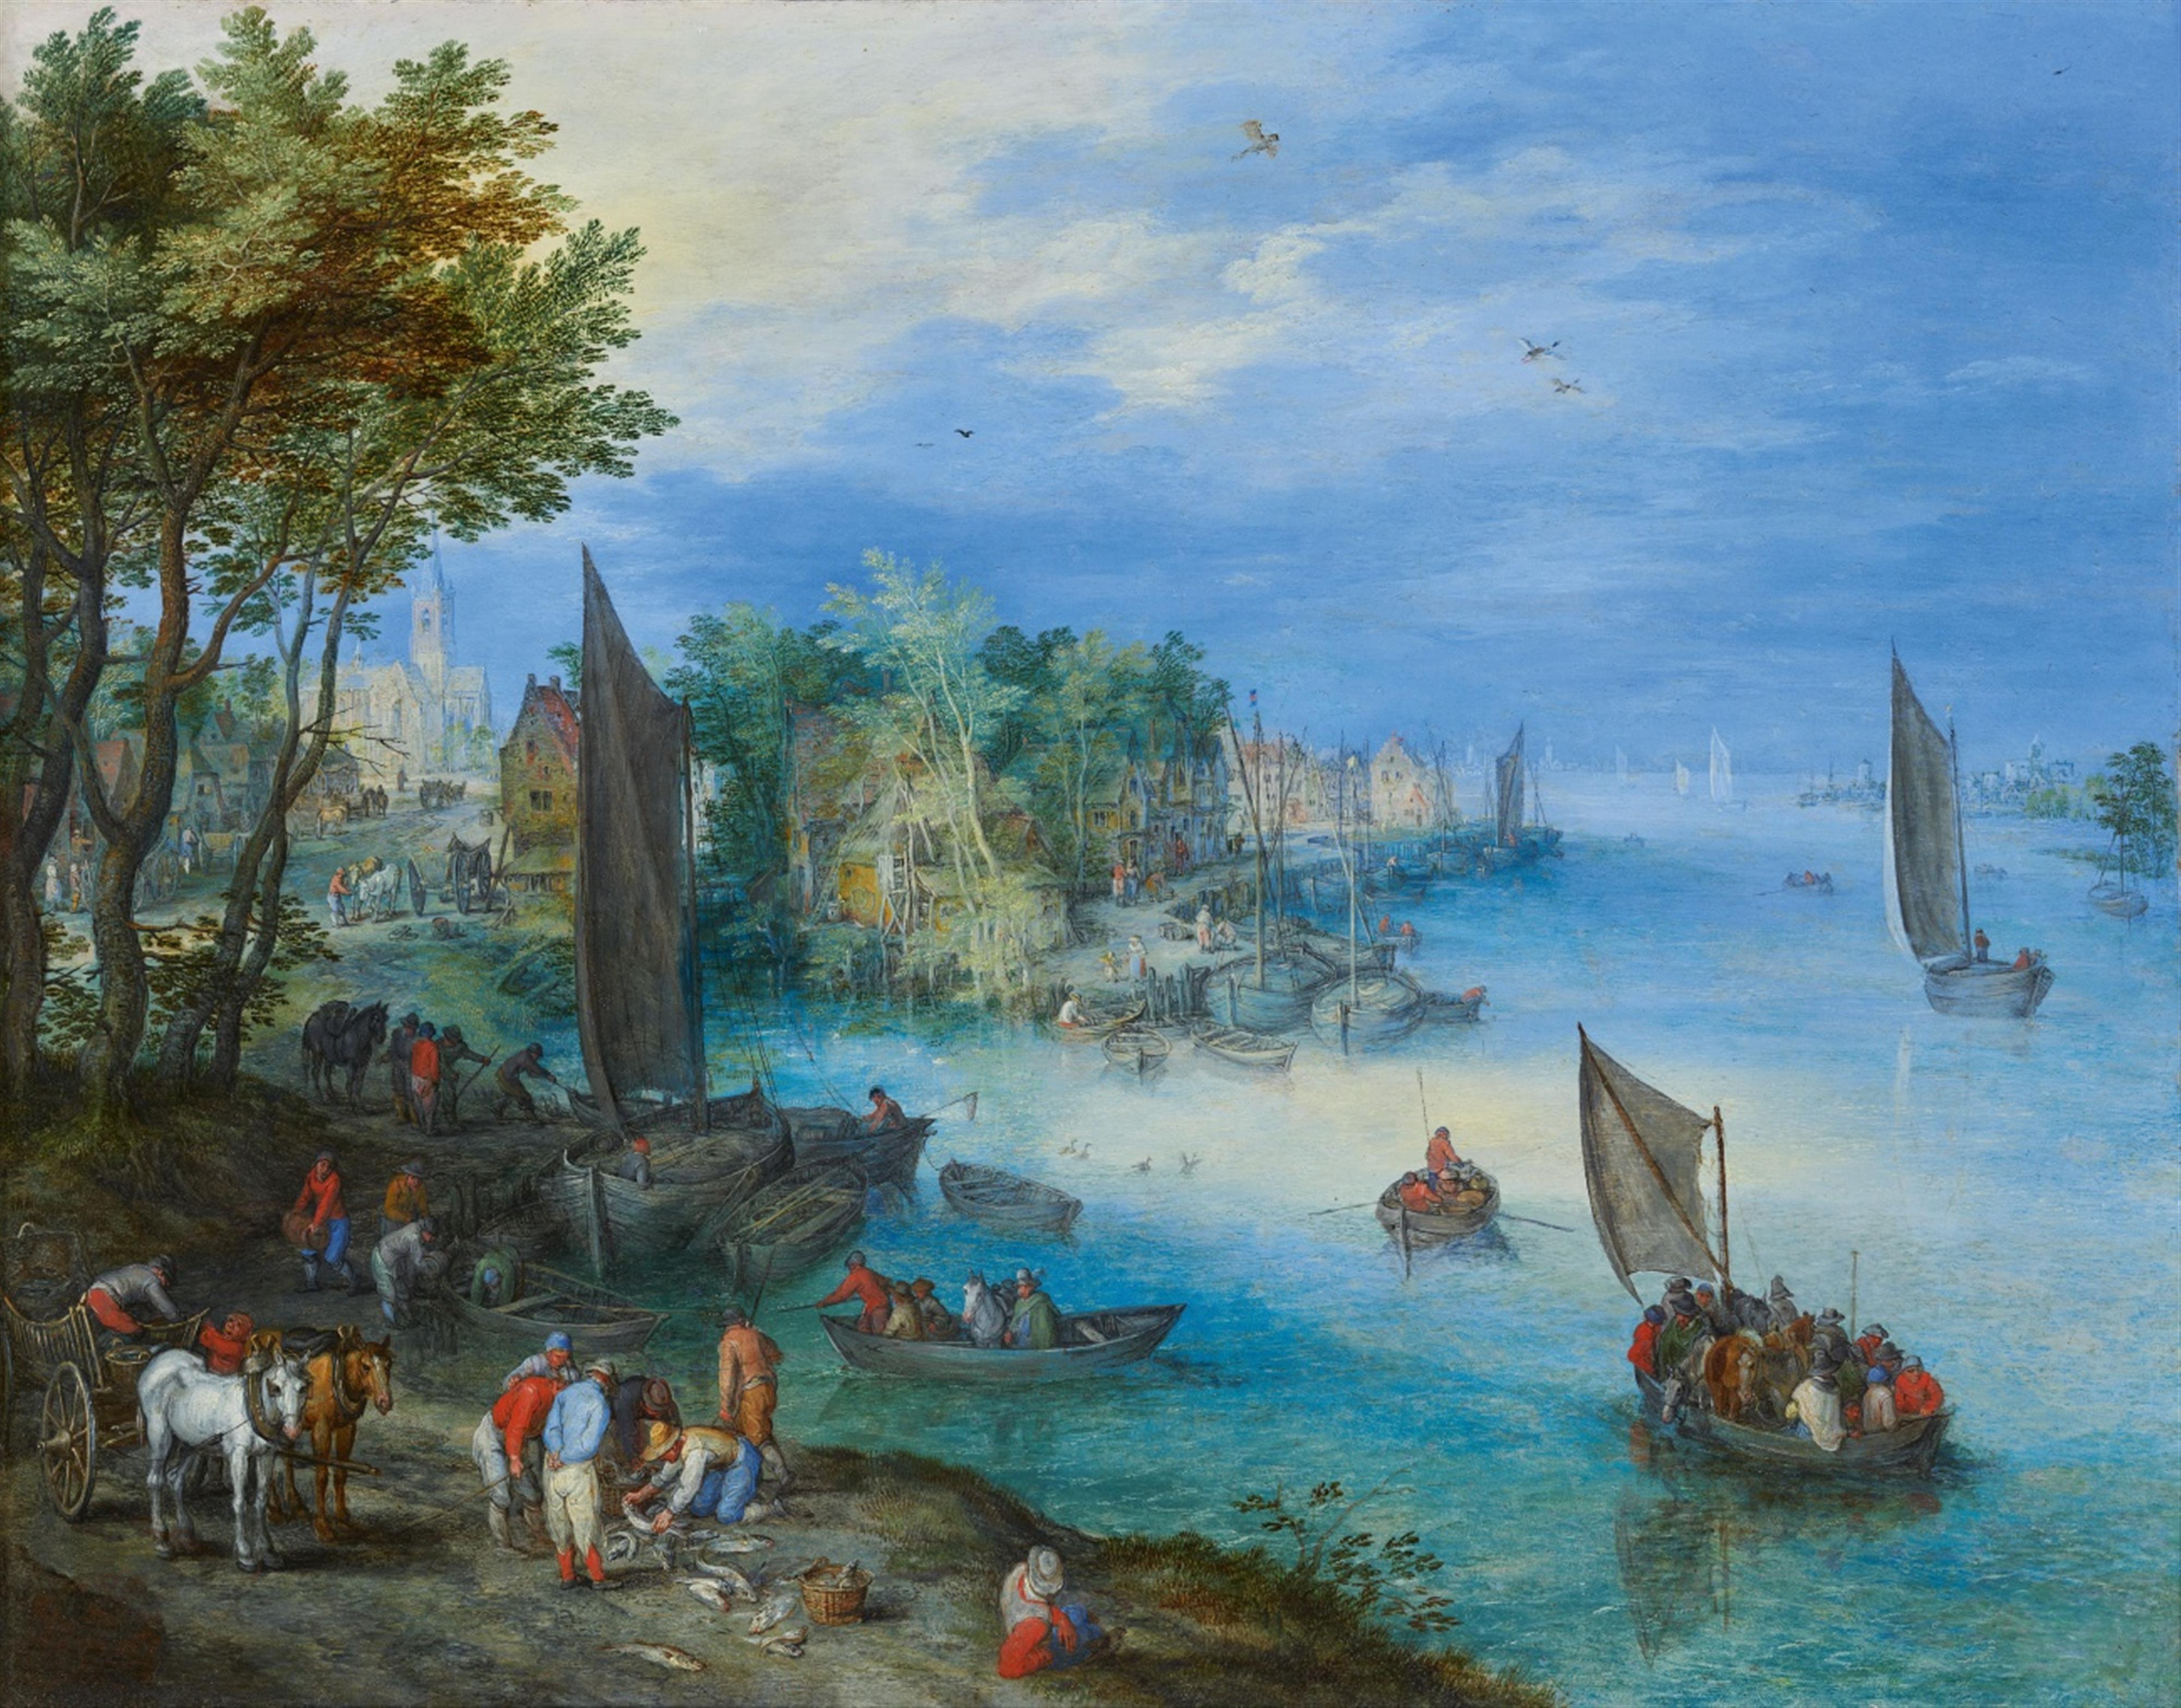 Jan Brueghel the Elder - River Landscape with Fishers and a Cart